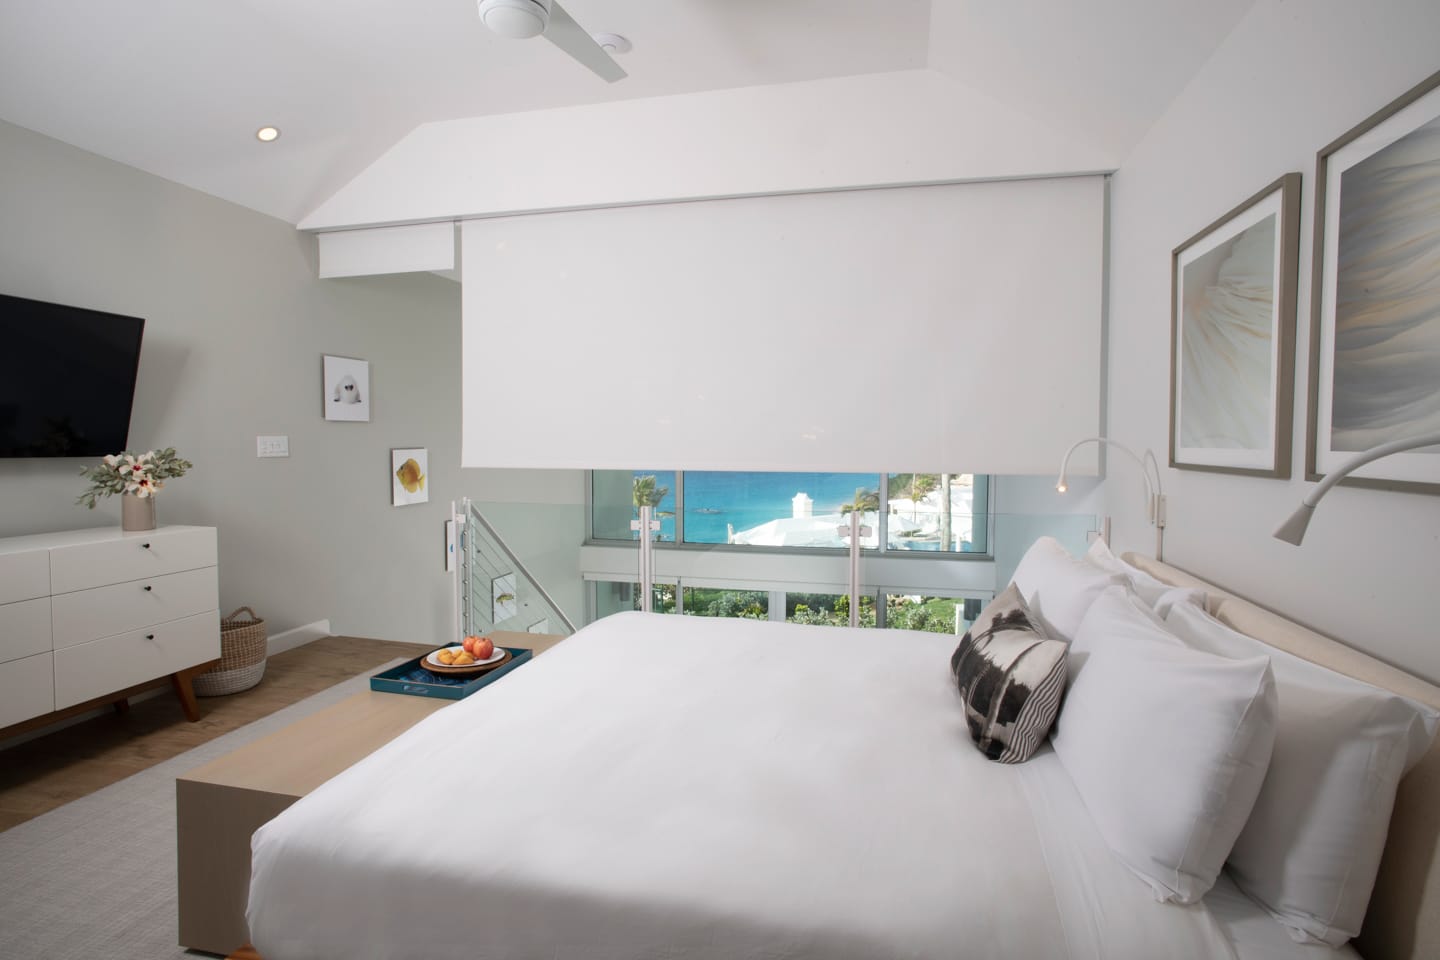 A loft bedroom with white shades covering a large window.